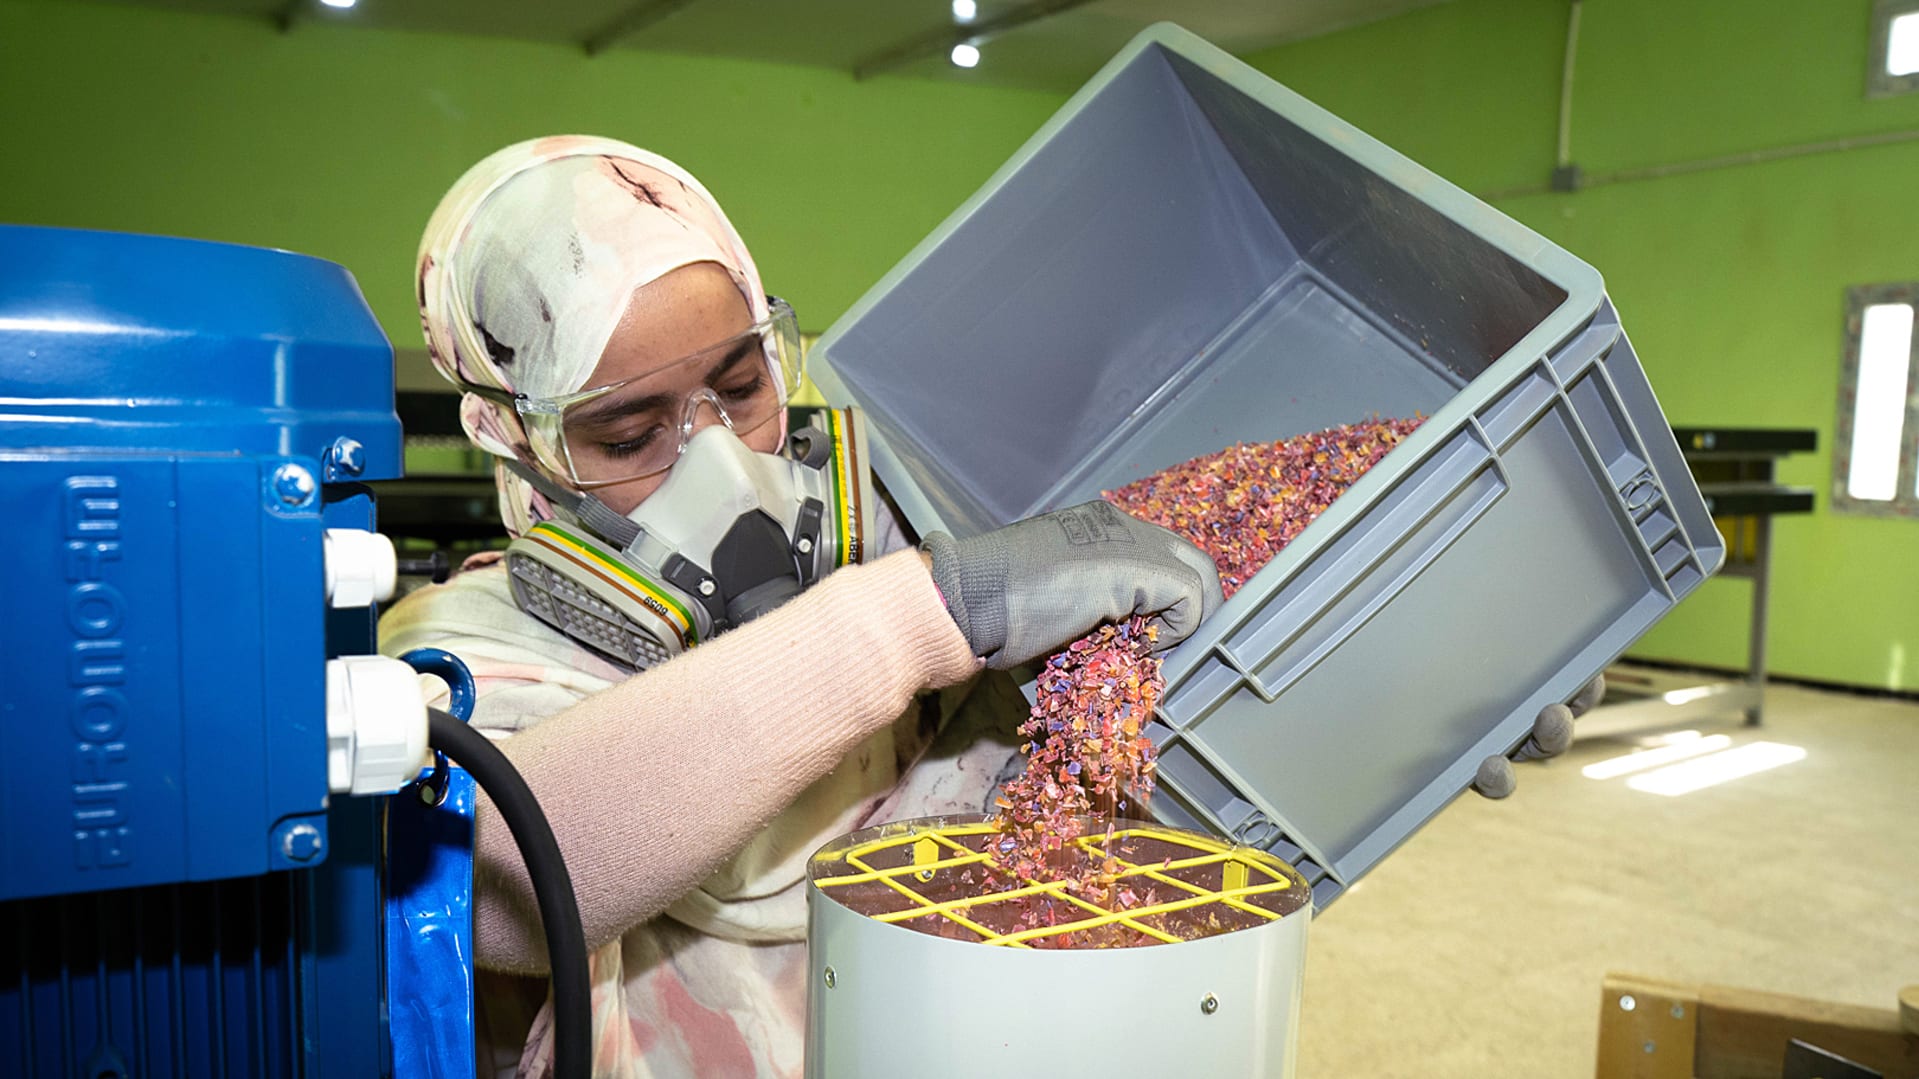 The Sahara desert is full of plastic trash. This refugee camp is recycling it into new products